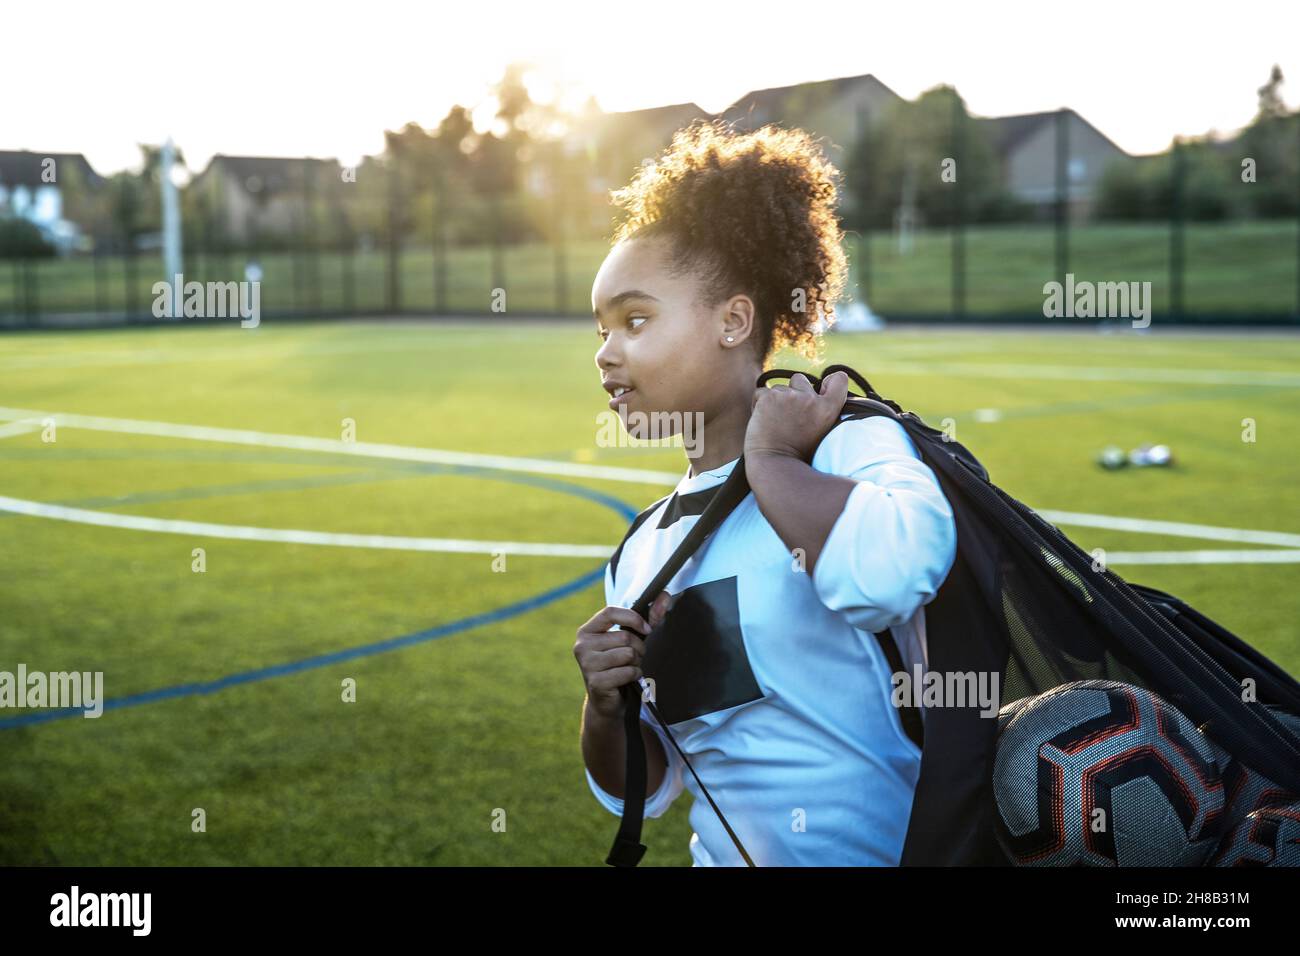 UK, Rear view of female soccer player carrying bag with balls in field Stock Photo